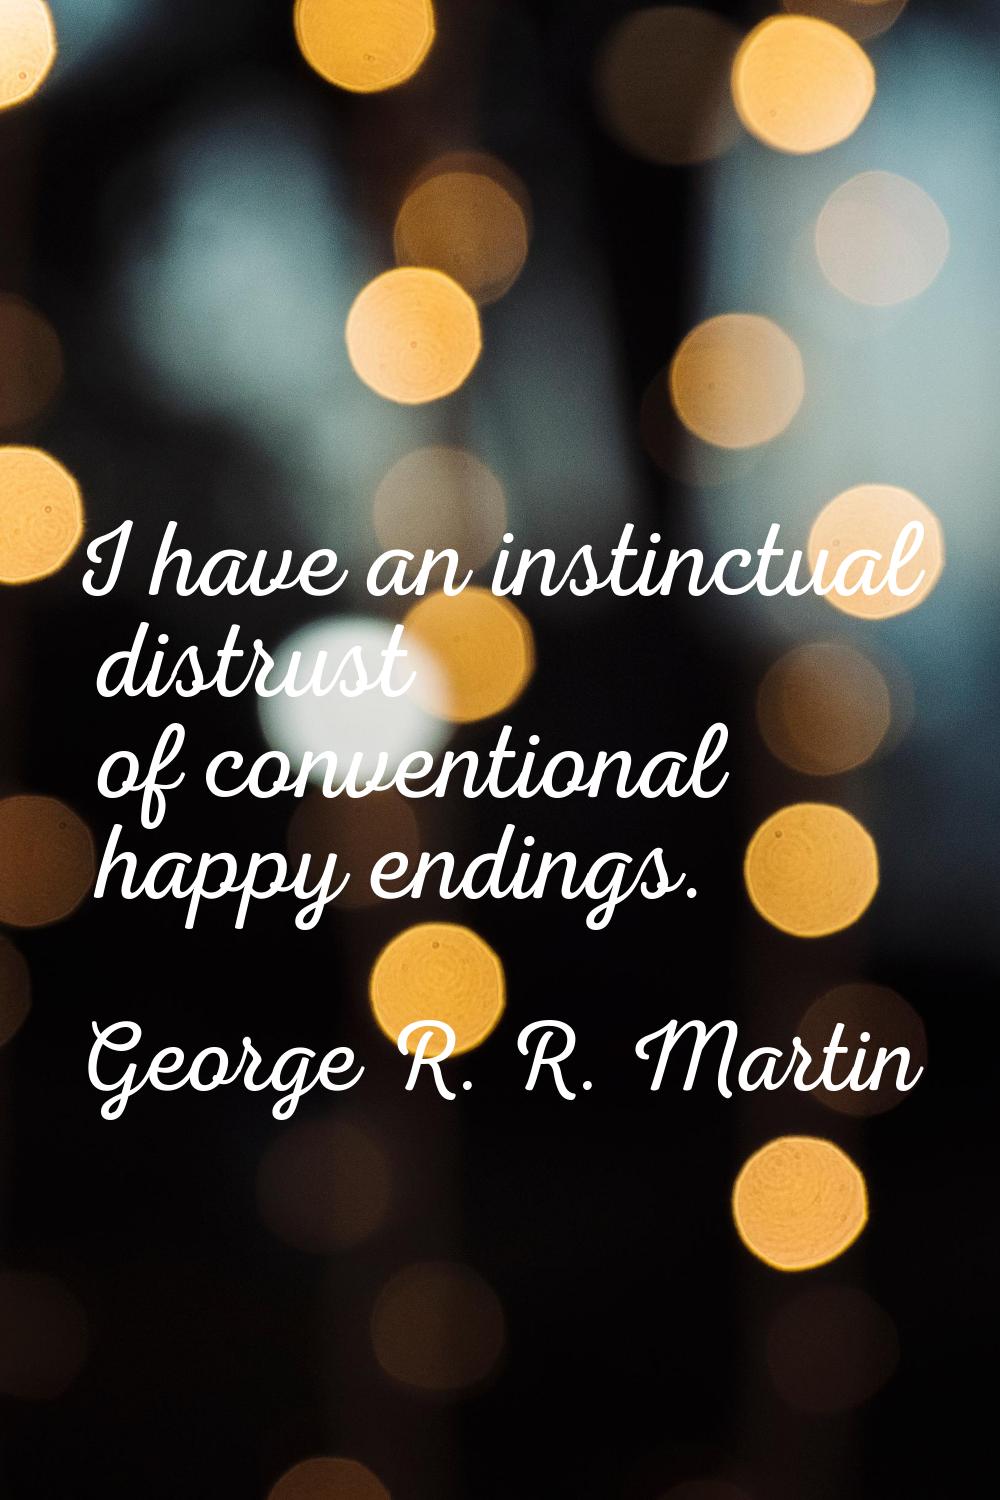 I have an instinctual distrust of conventional happy endings.